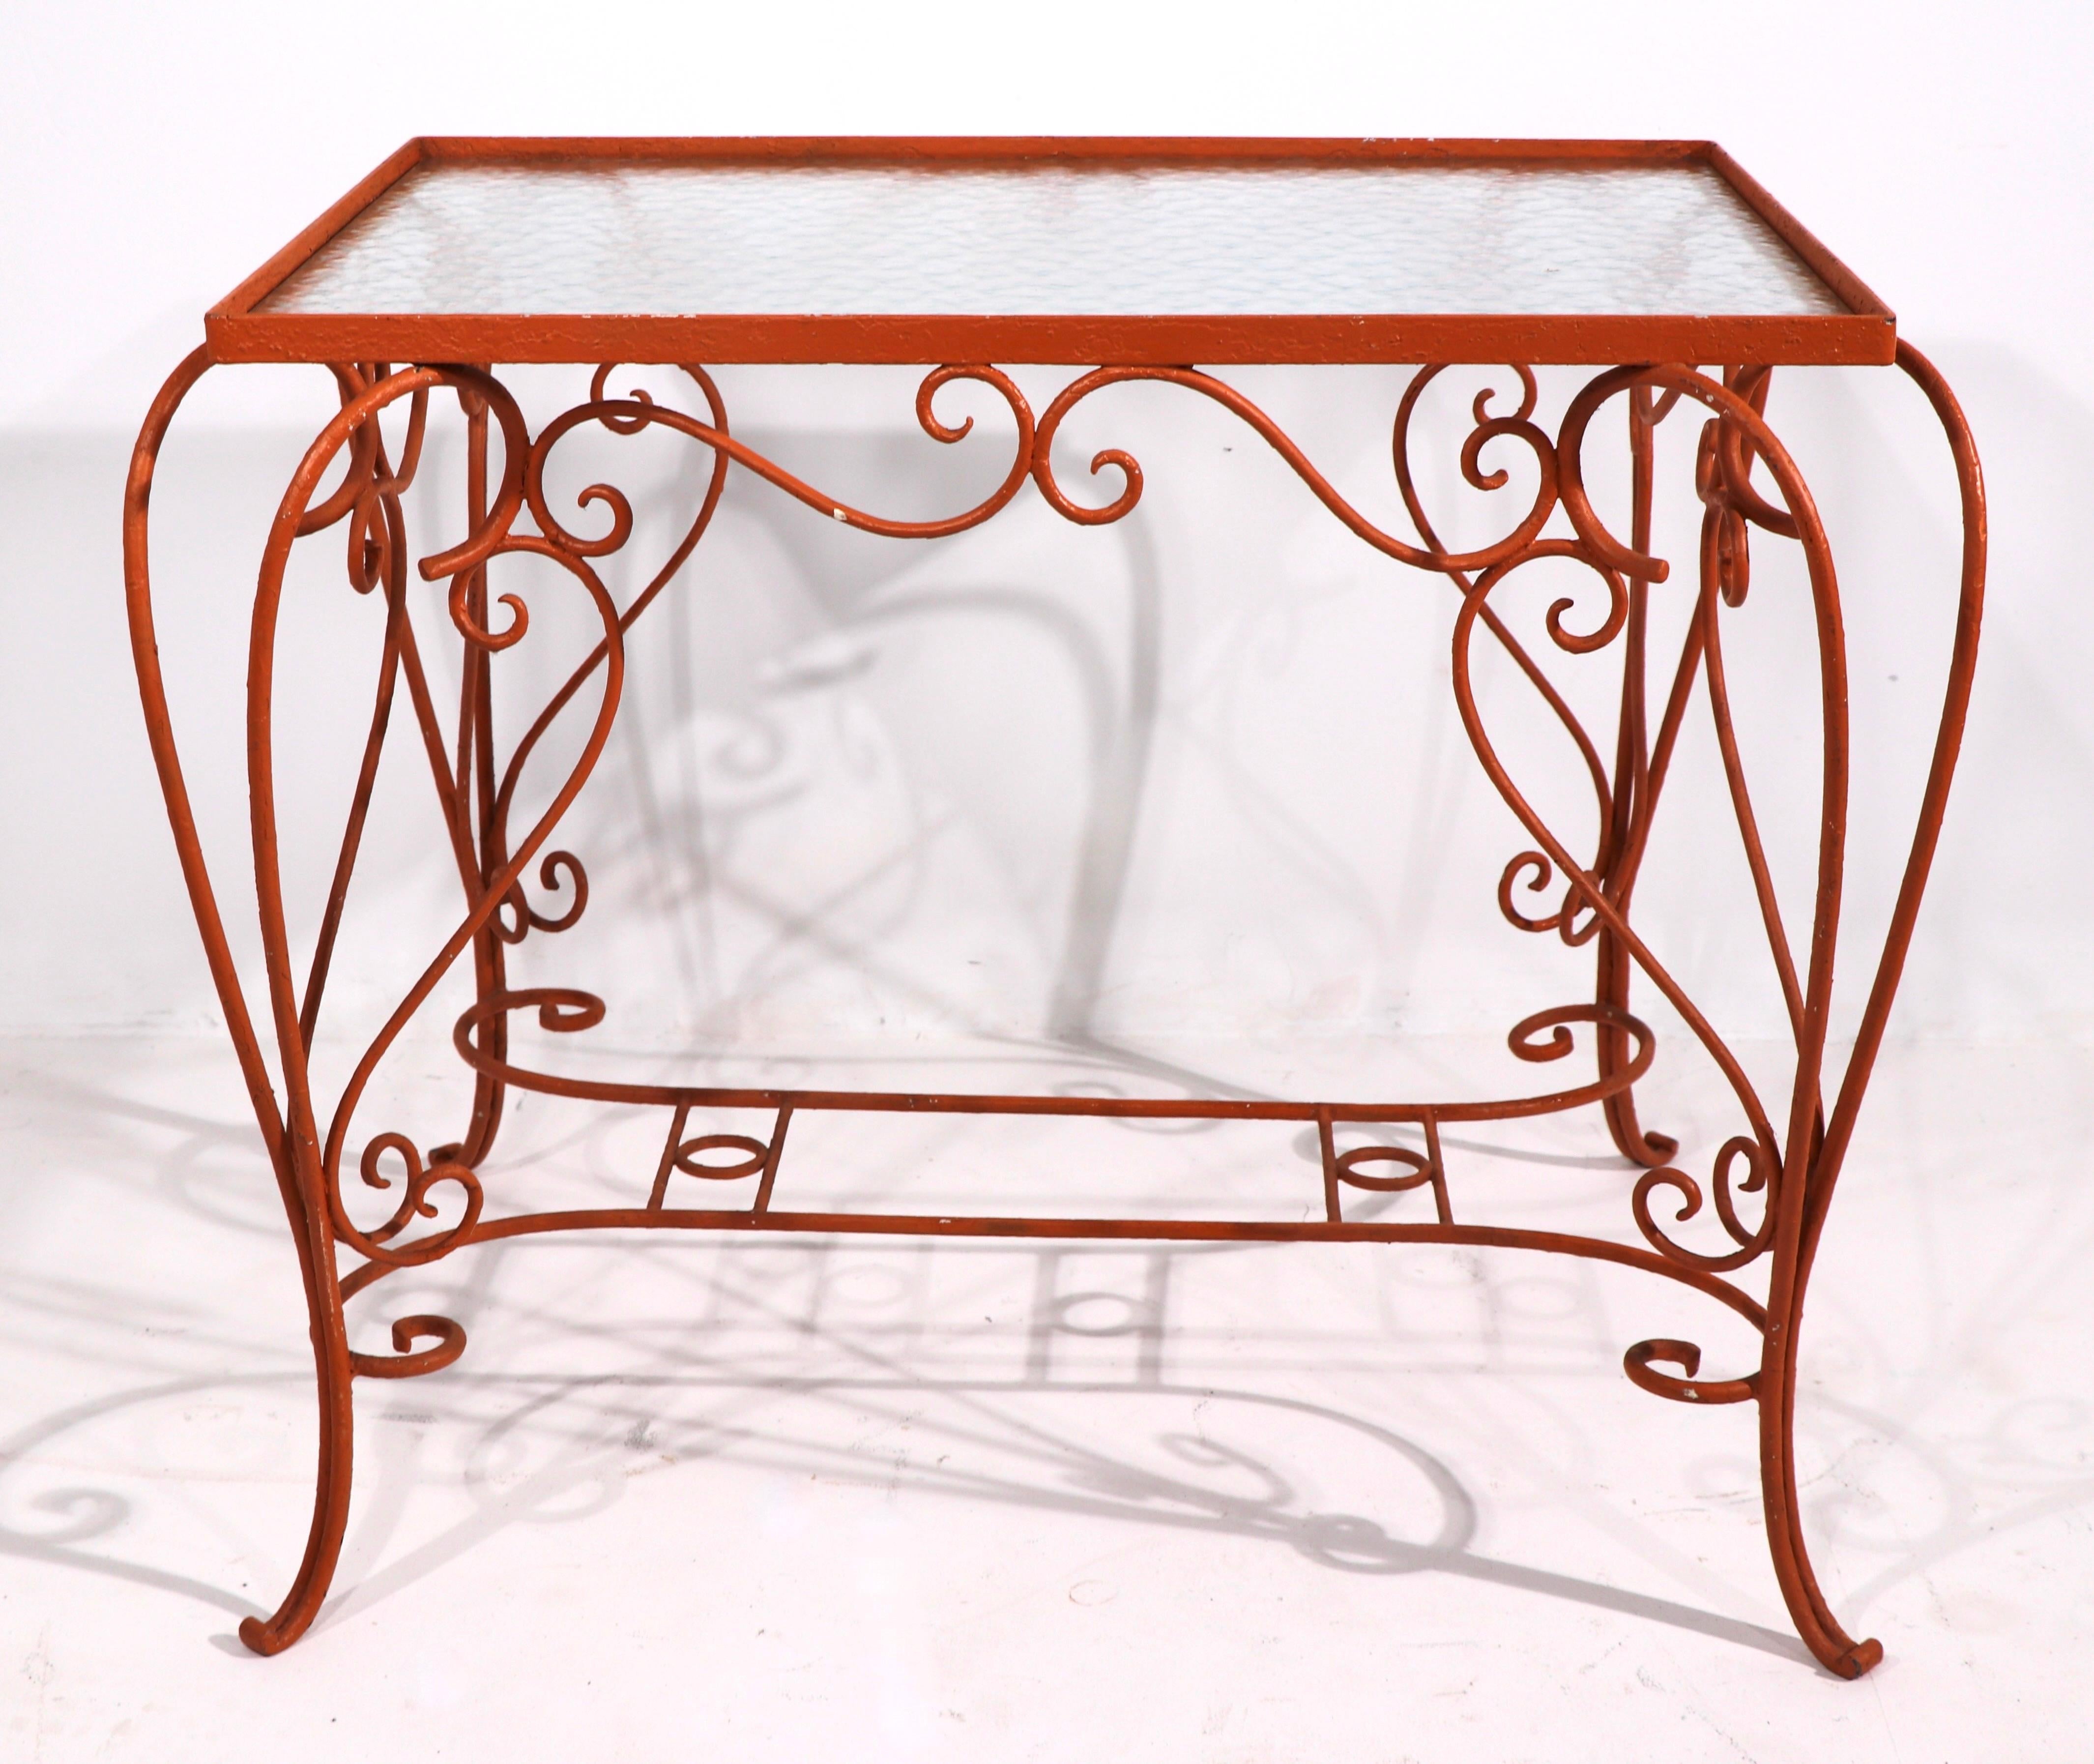 American Ornate Wrought Iron Garden Patio Poolside Table with Textured Glass top